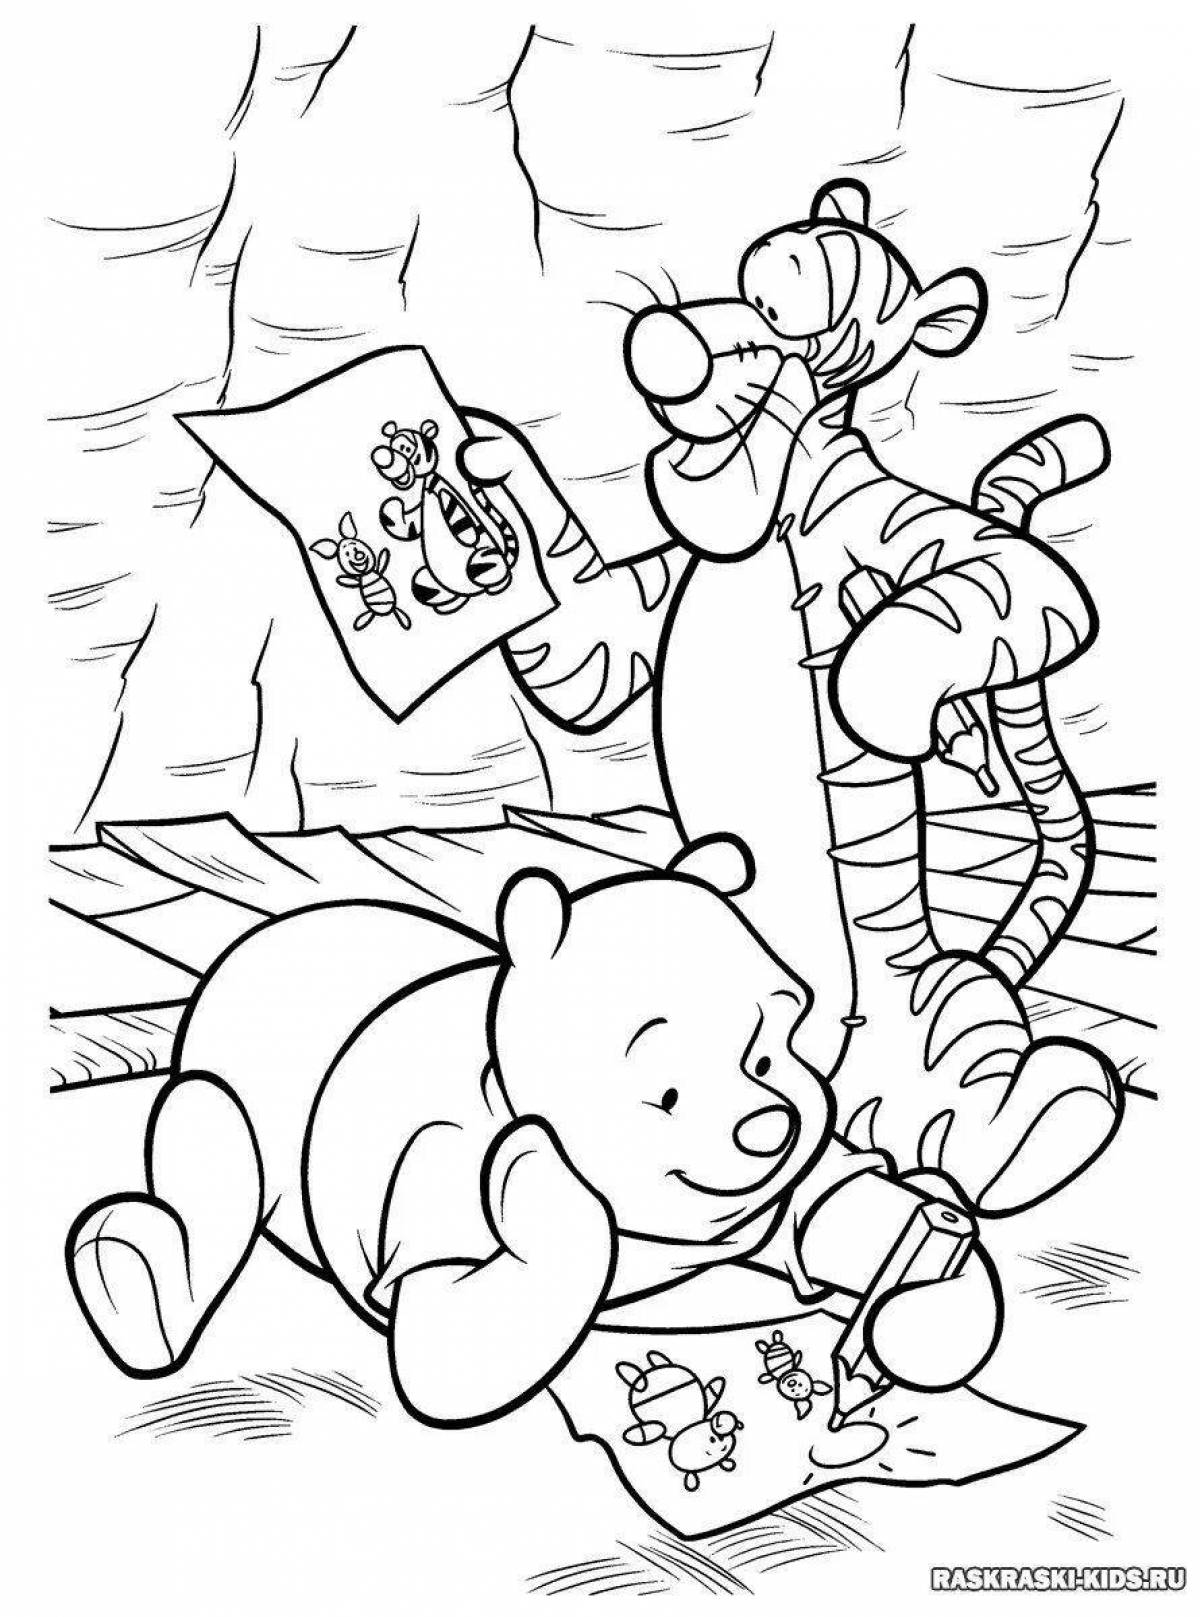 Adorable winnie the pooh and friends coloring book